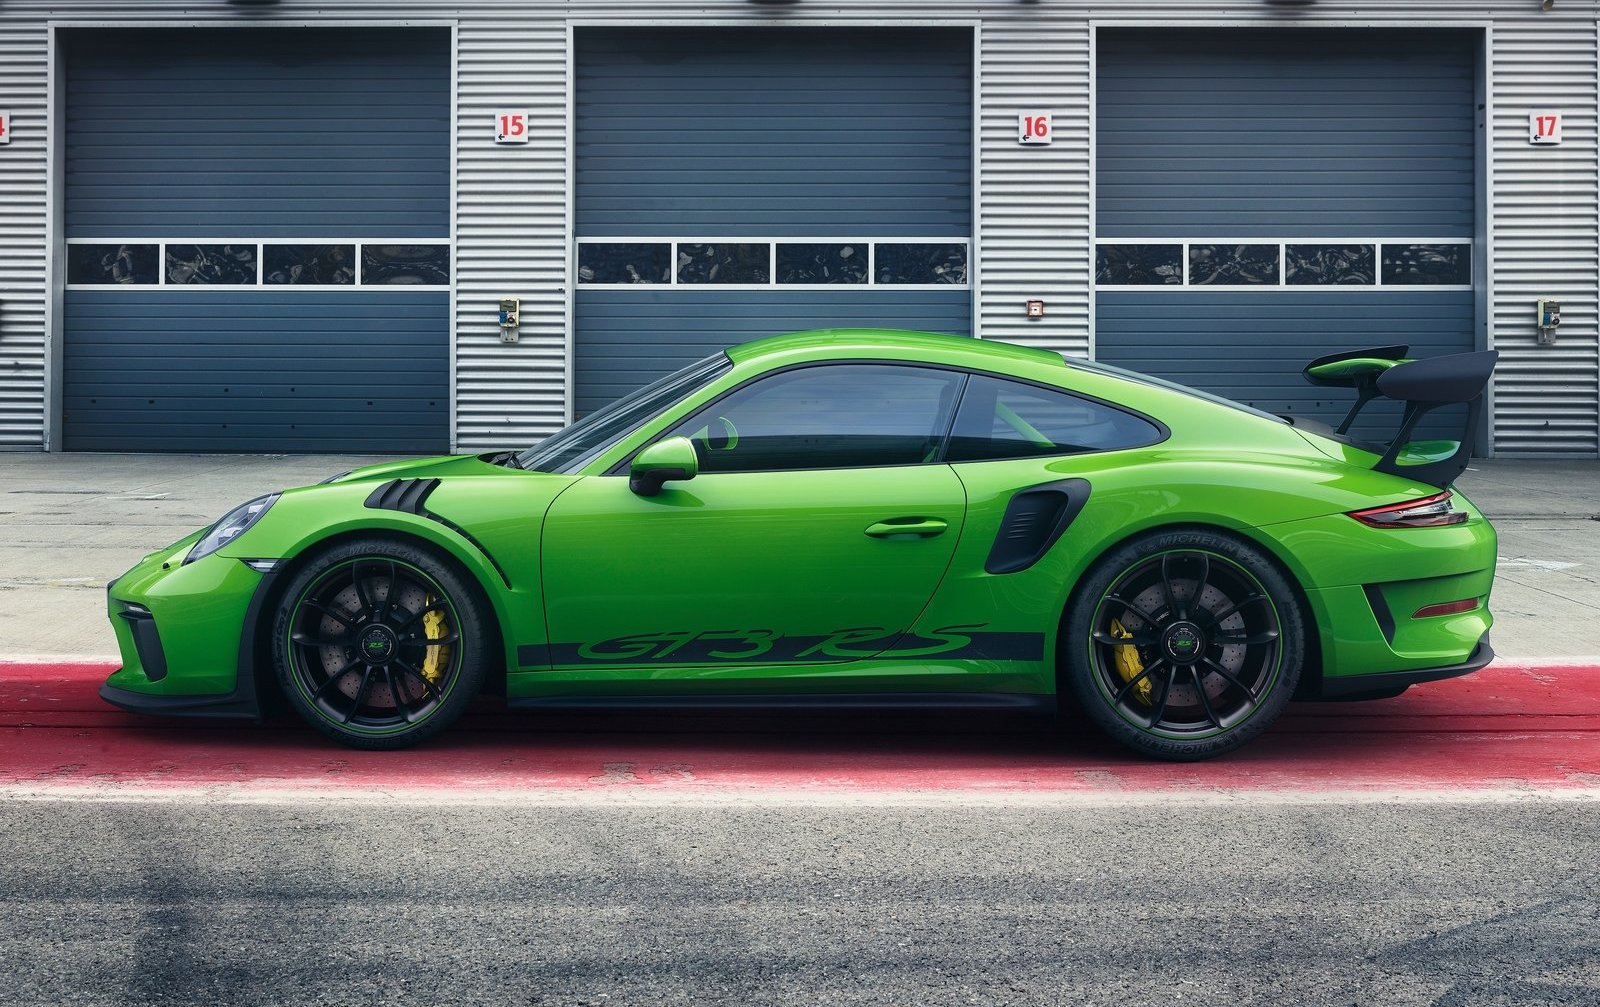 2018 Porsche 911 GT3 RS revealed, on sale from 416,500